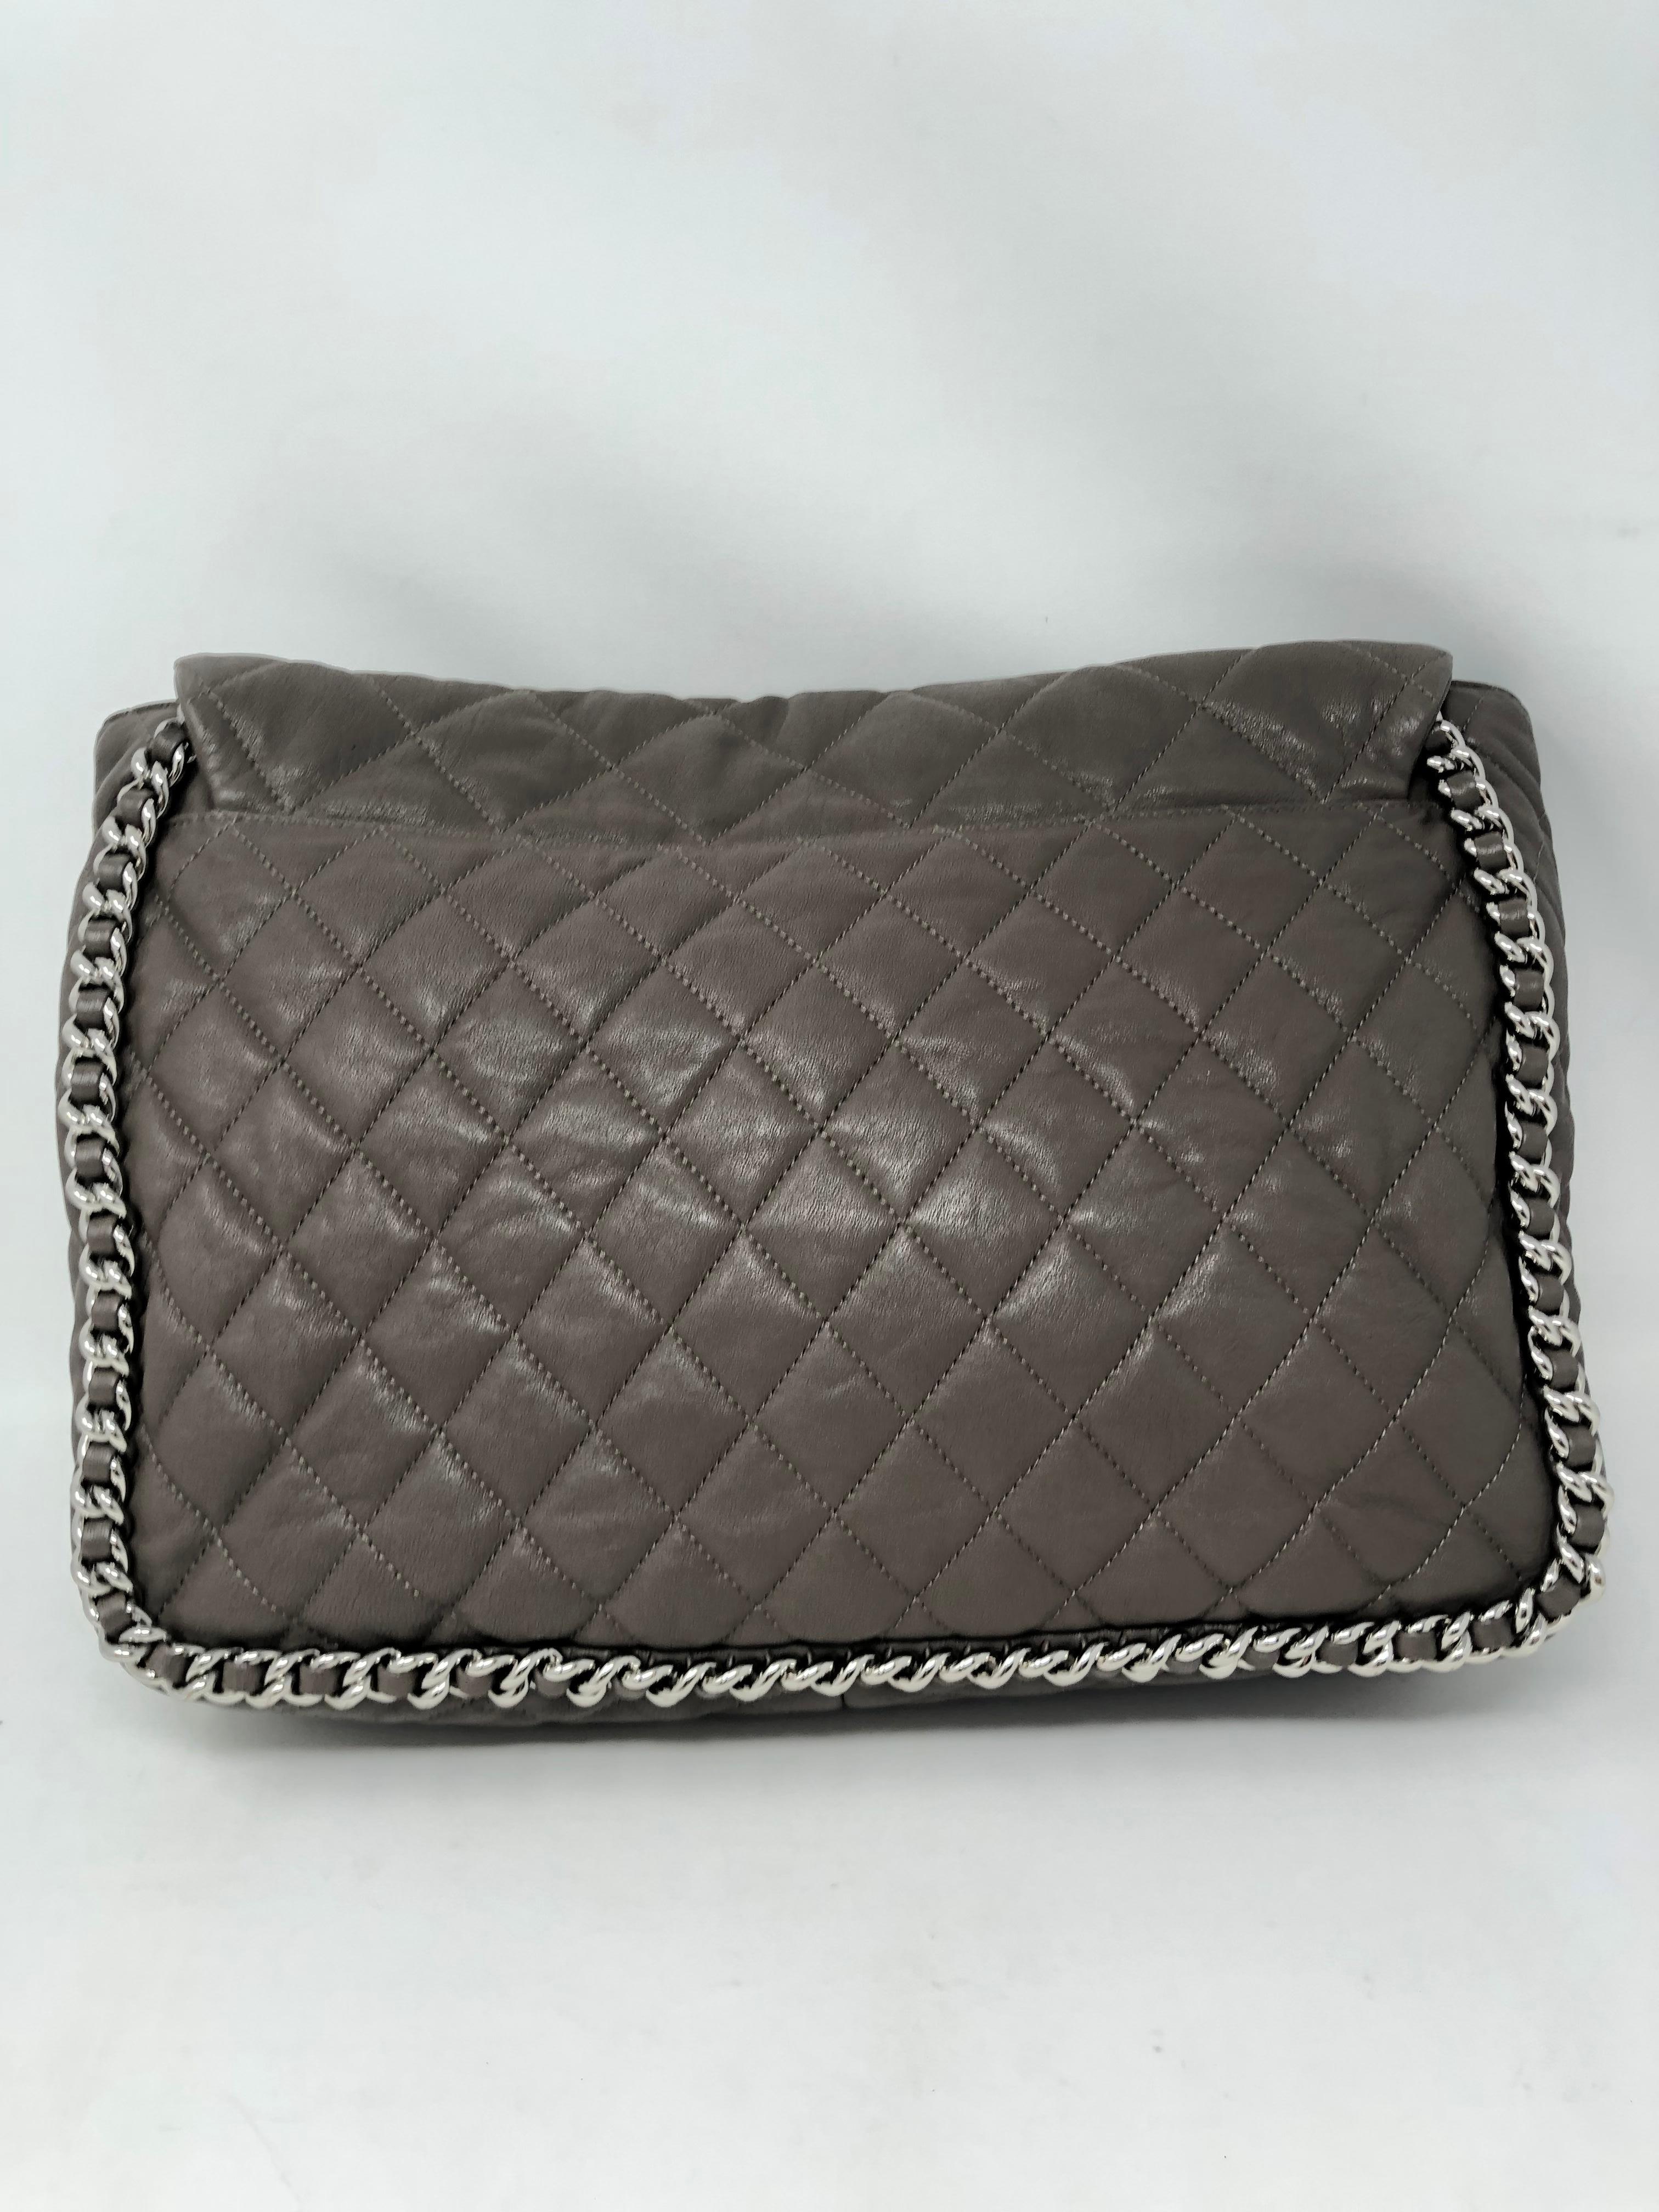 Women's or Men's Chanel Large Gray Chain Around Bag